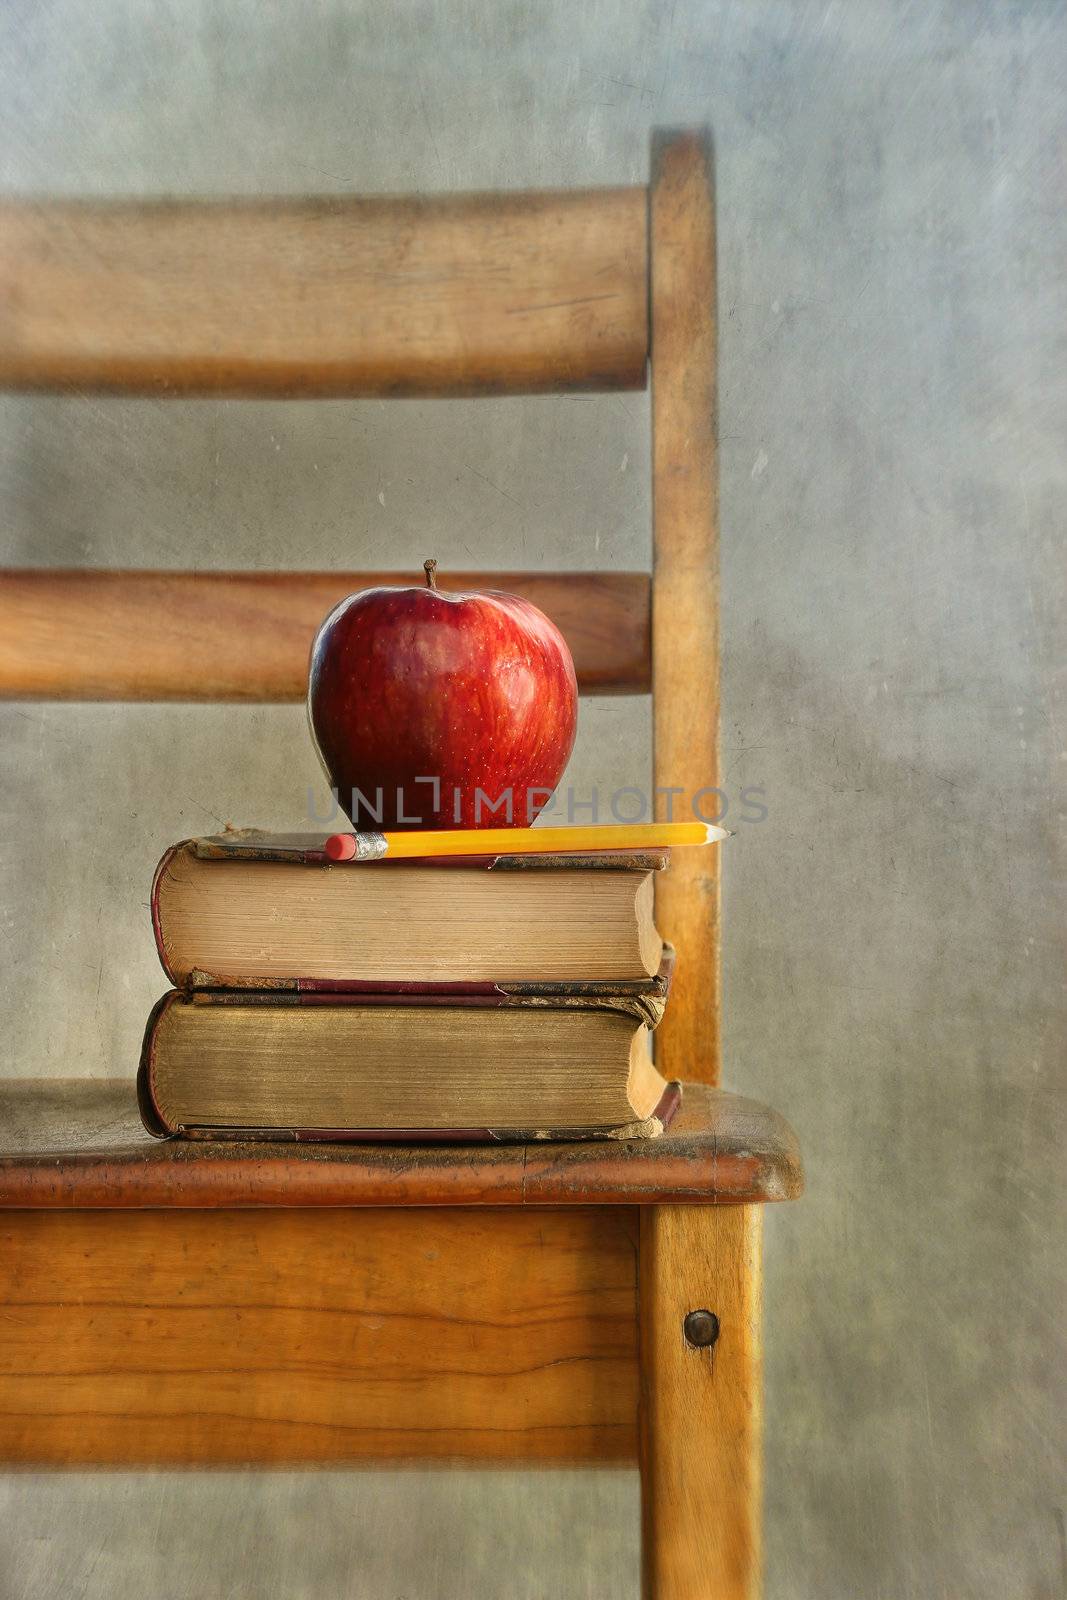 Apple and old books on school chair by Sandralise